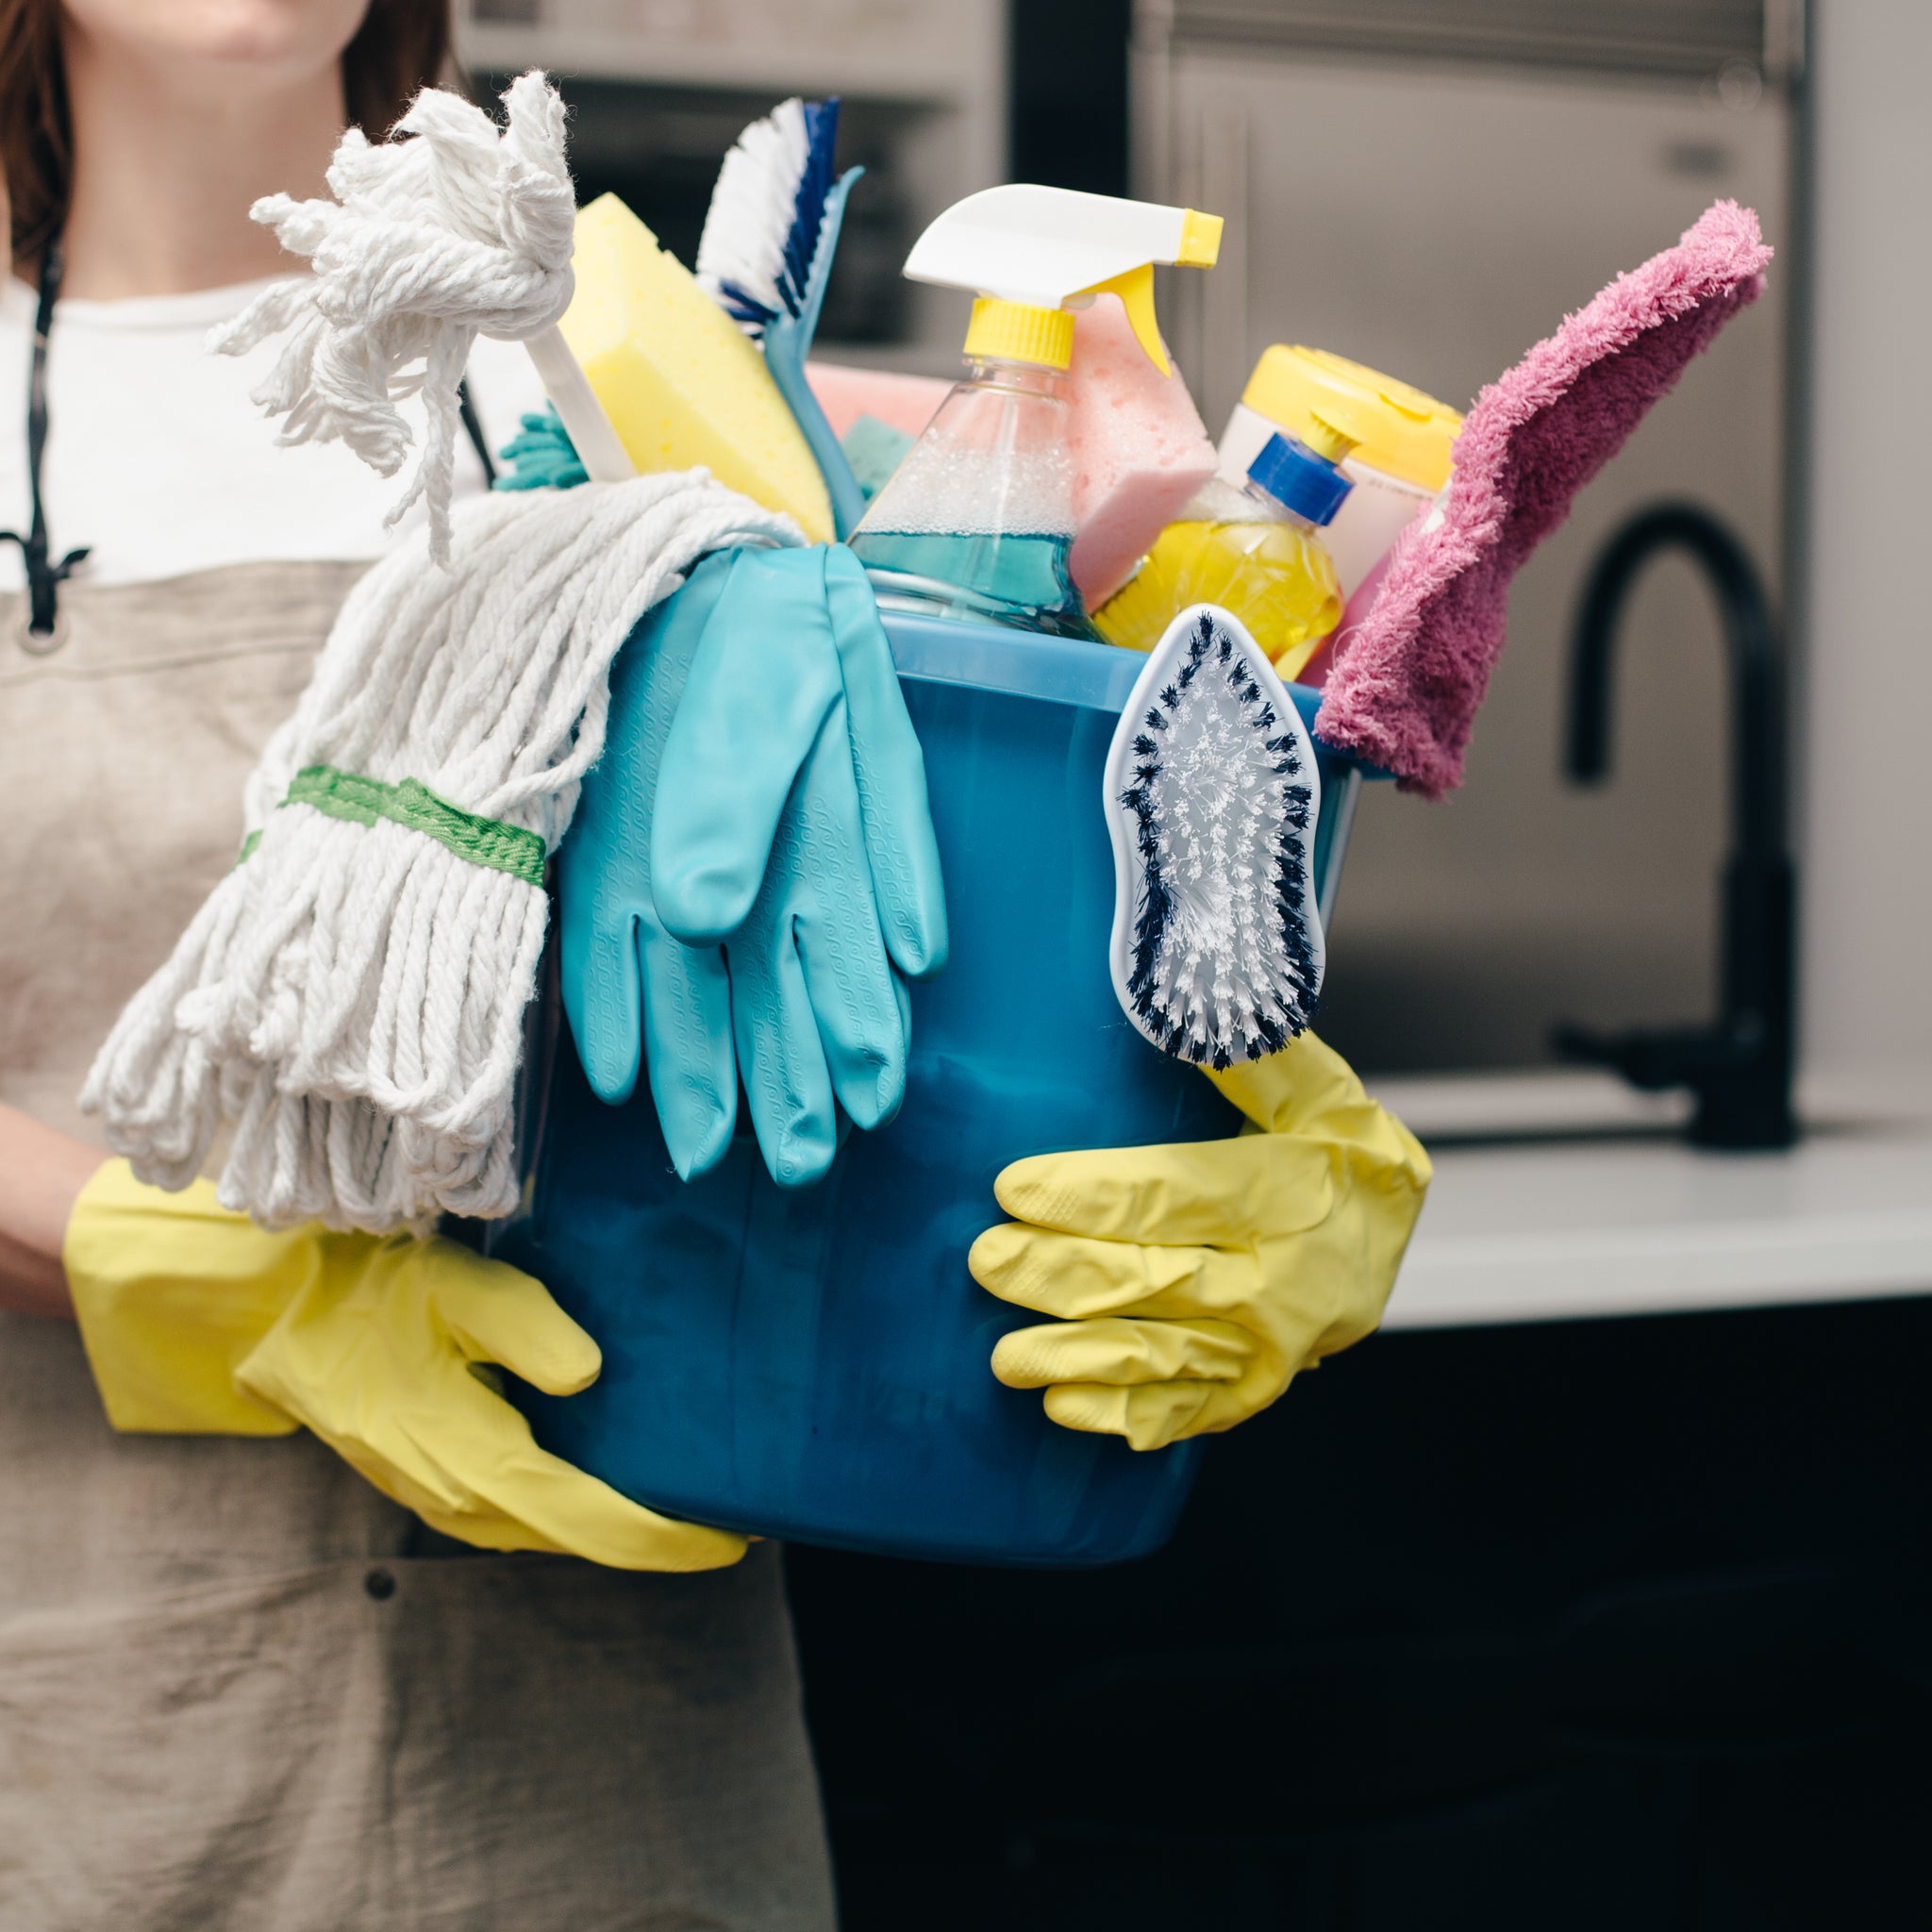 holding bucket of cleaning supplies